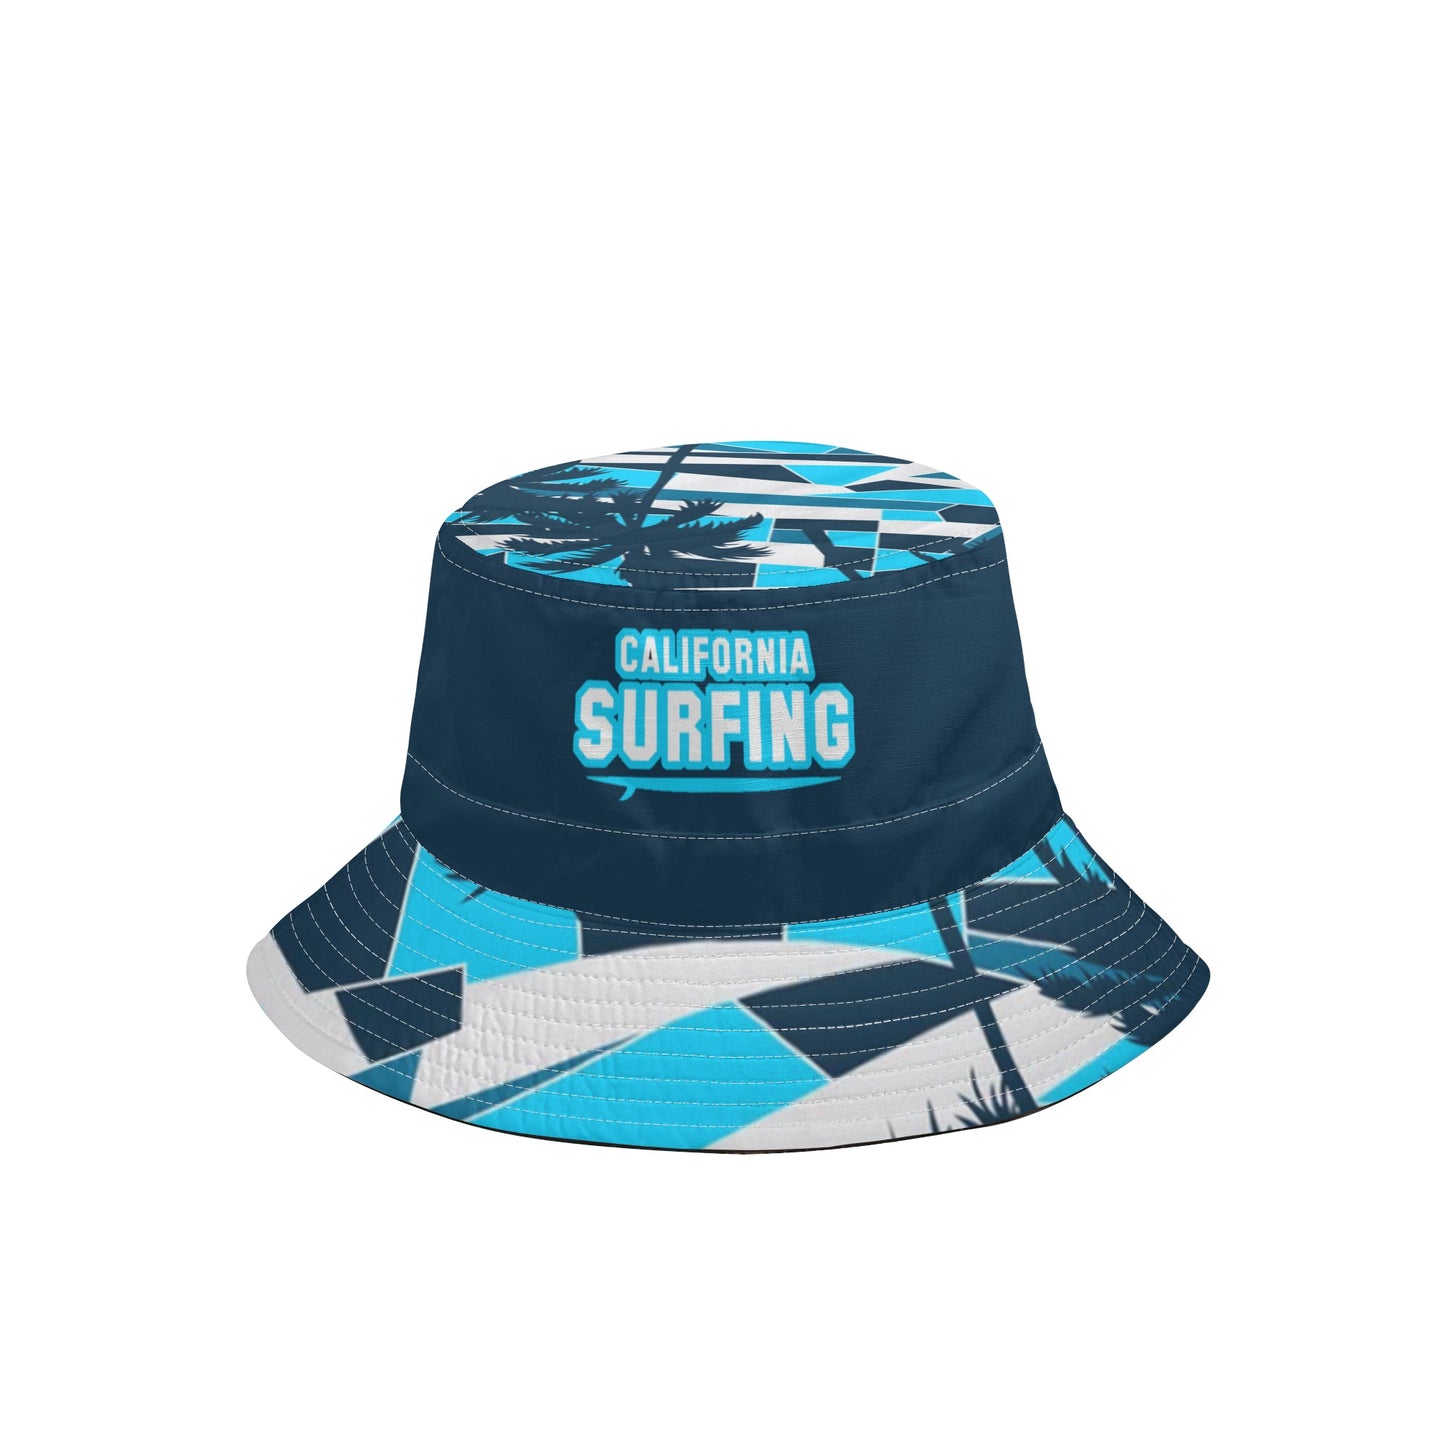 California Surfing Fishermans Hat for the Moment of Cowabunga, Ripetides and Waves